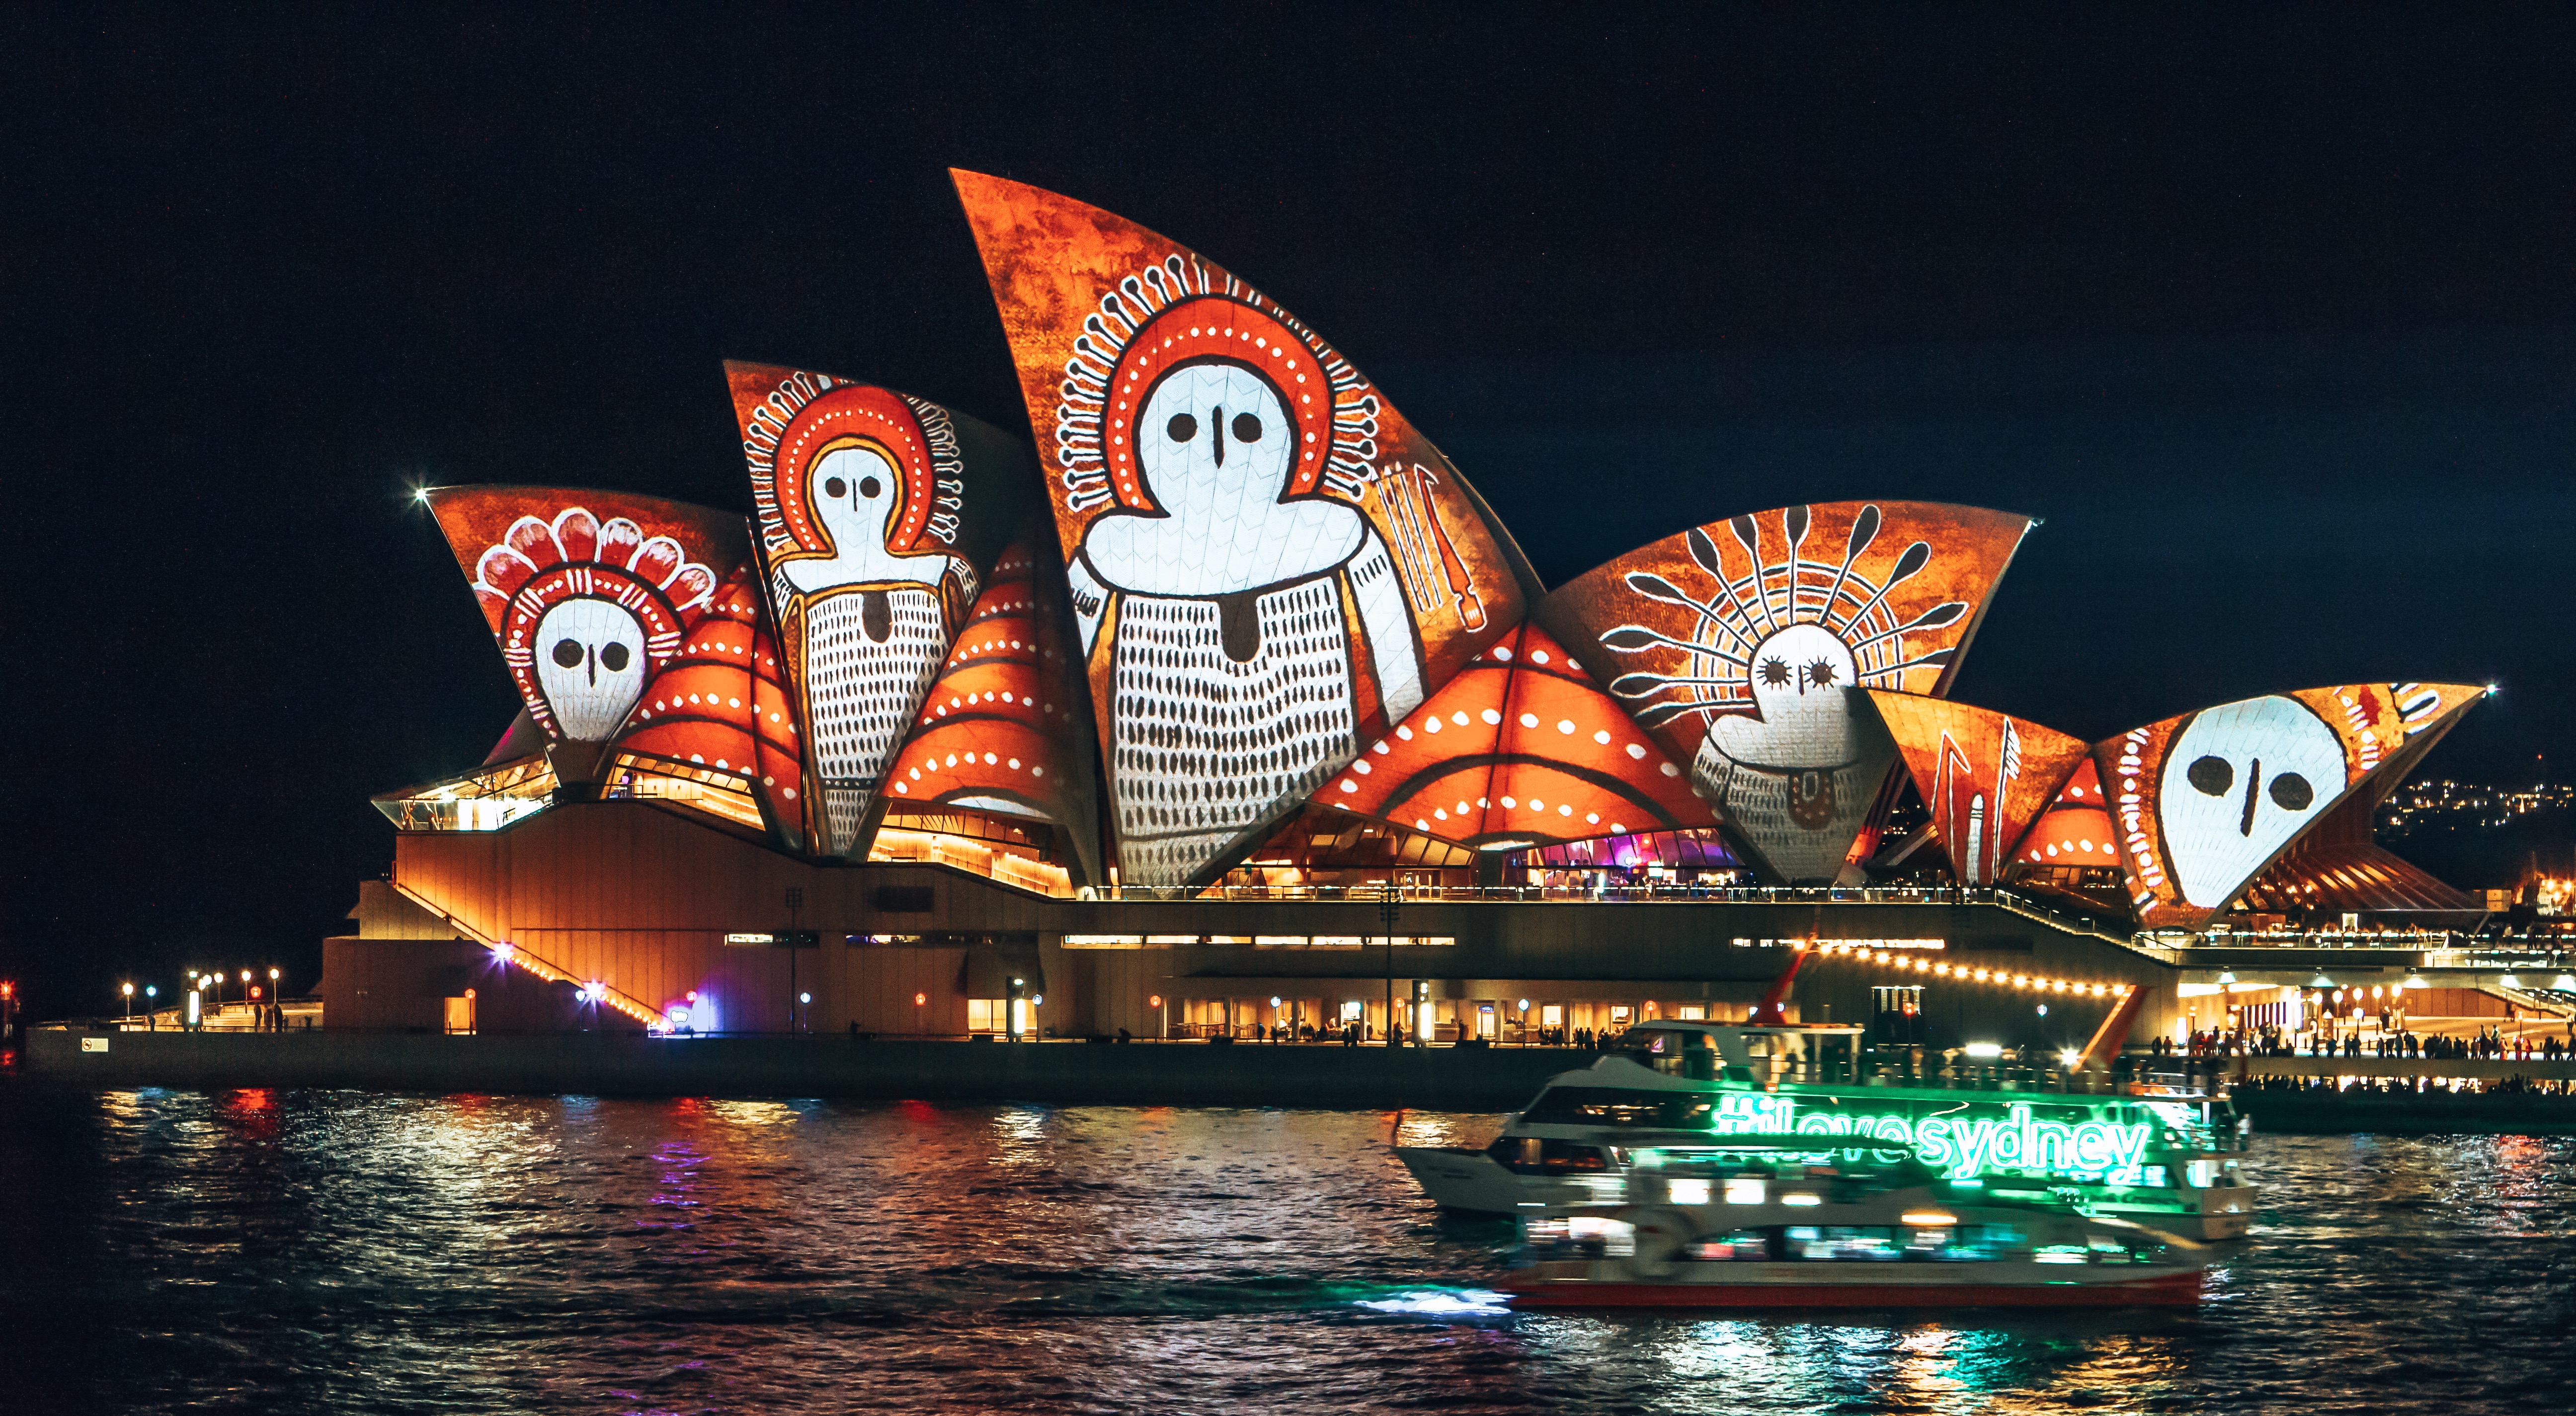 Sydney Opera House with light installation showing aboriginal art on the sails